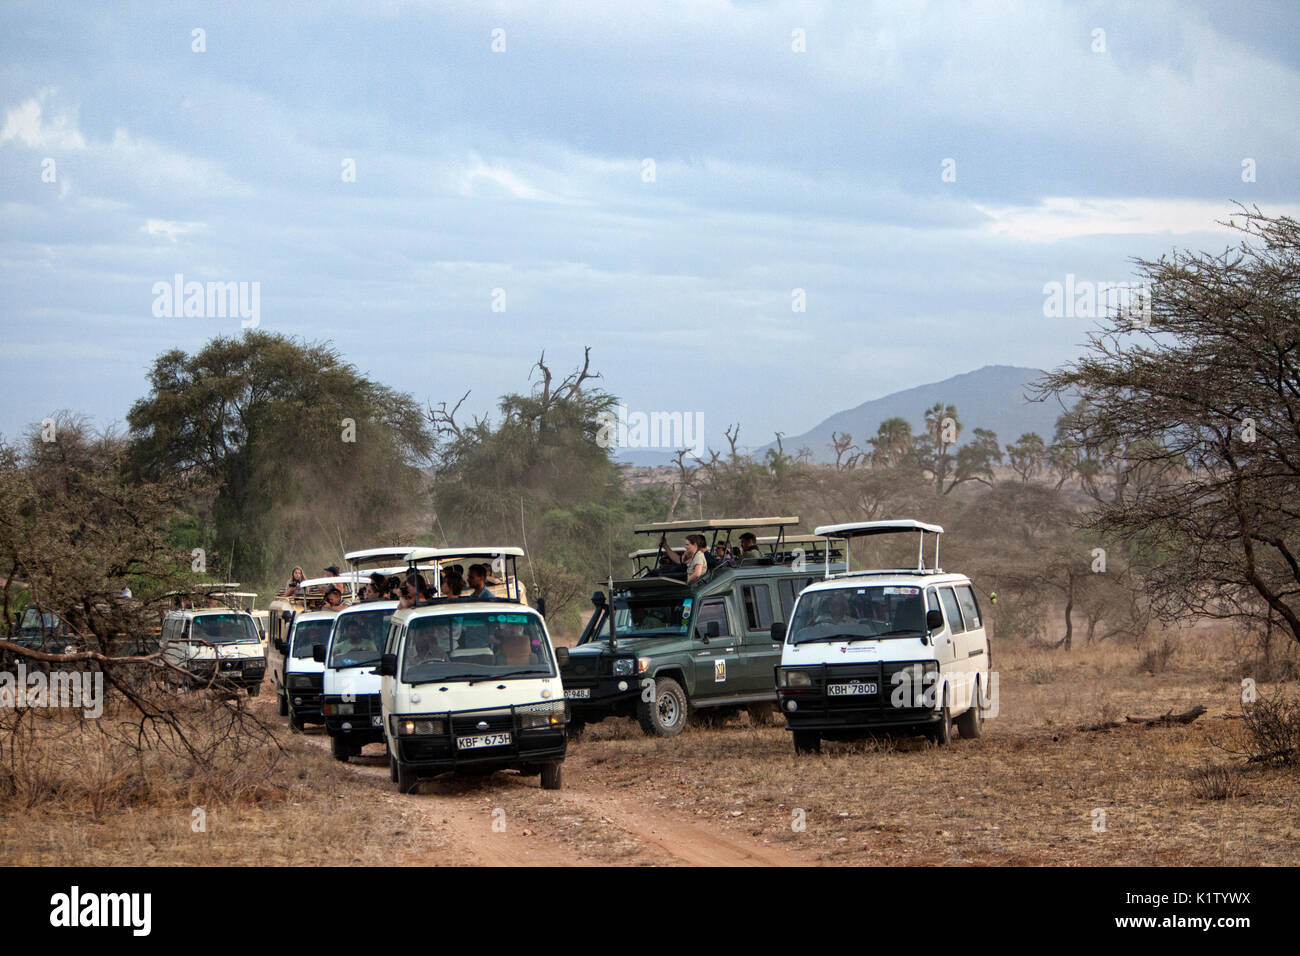 Group of safari rigs filled with tourists in the Samburu National Reserve, Kenya, Africa. Stock Photo